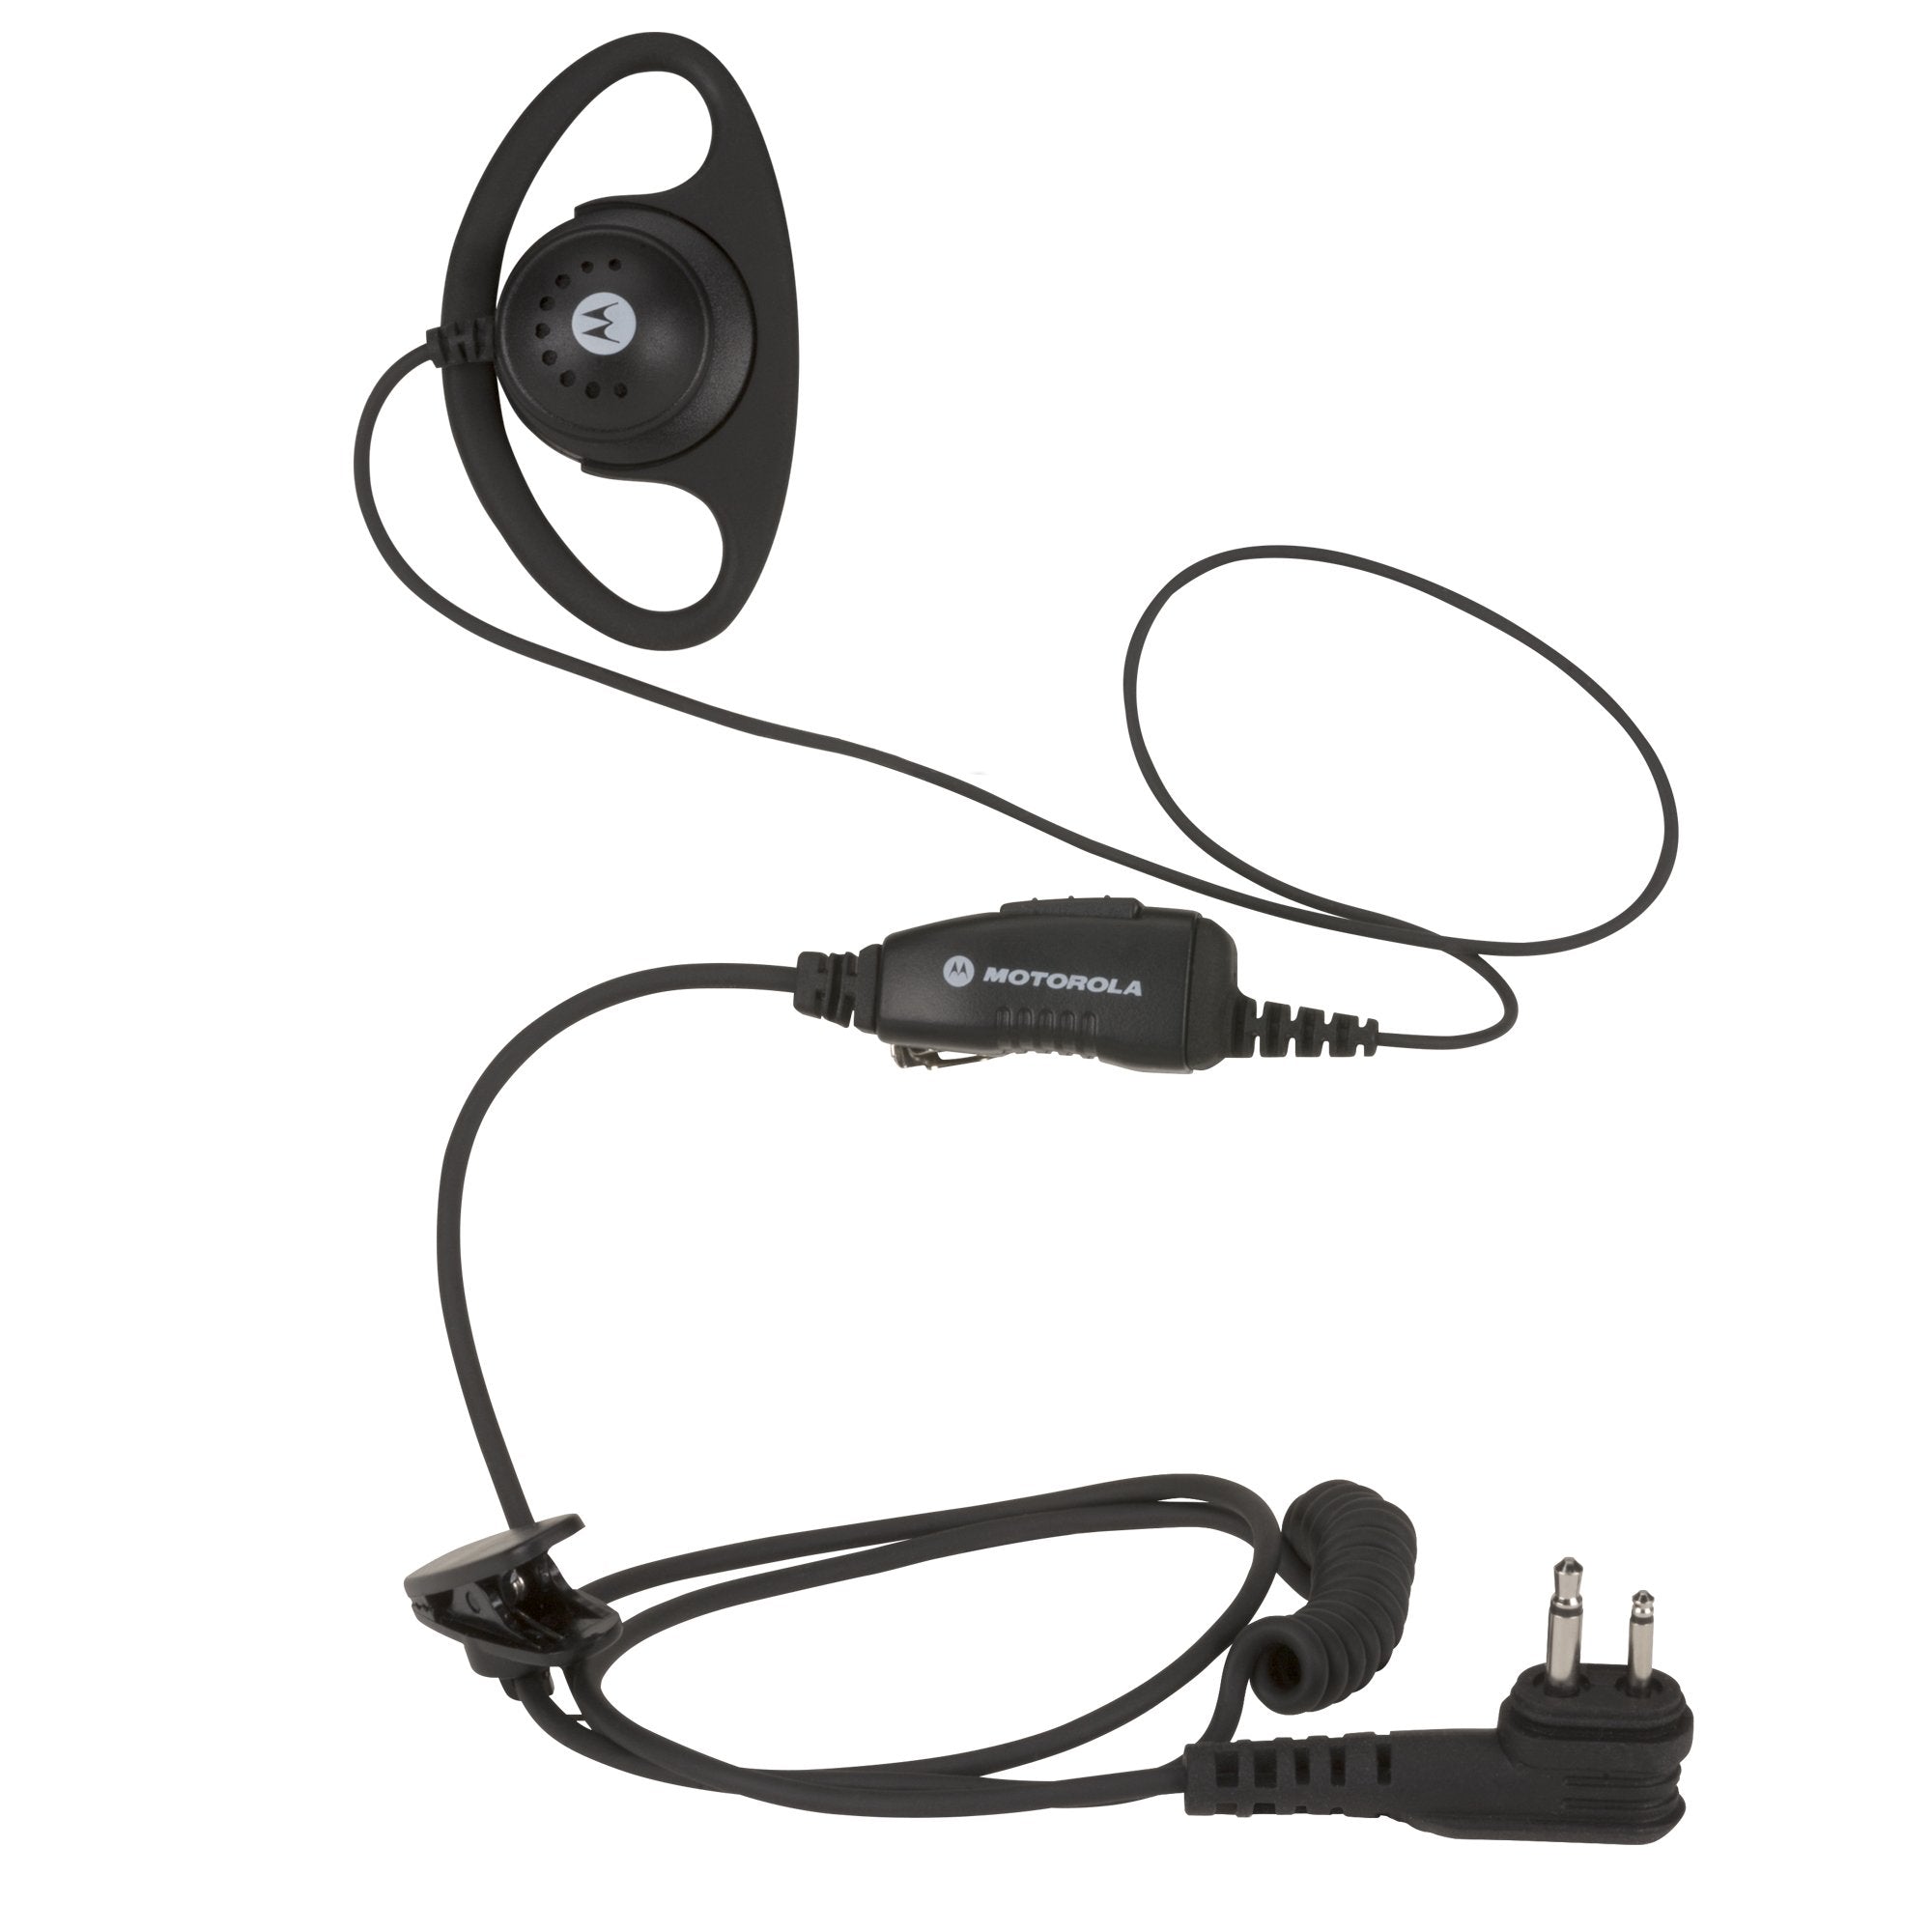 HKLN4599 D-Style Earpiece with in-line microphone and PTT